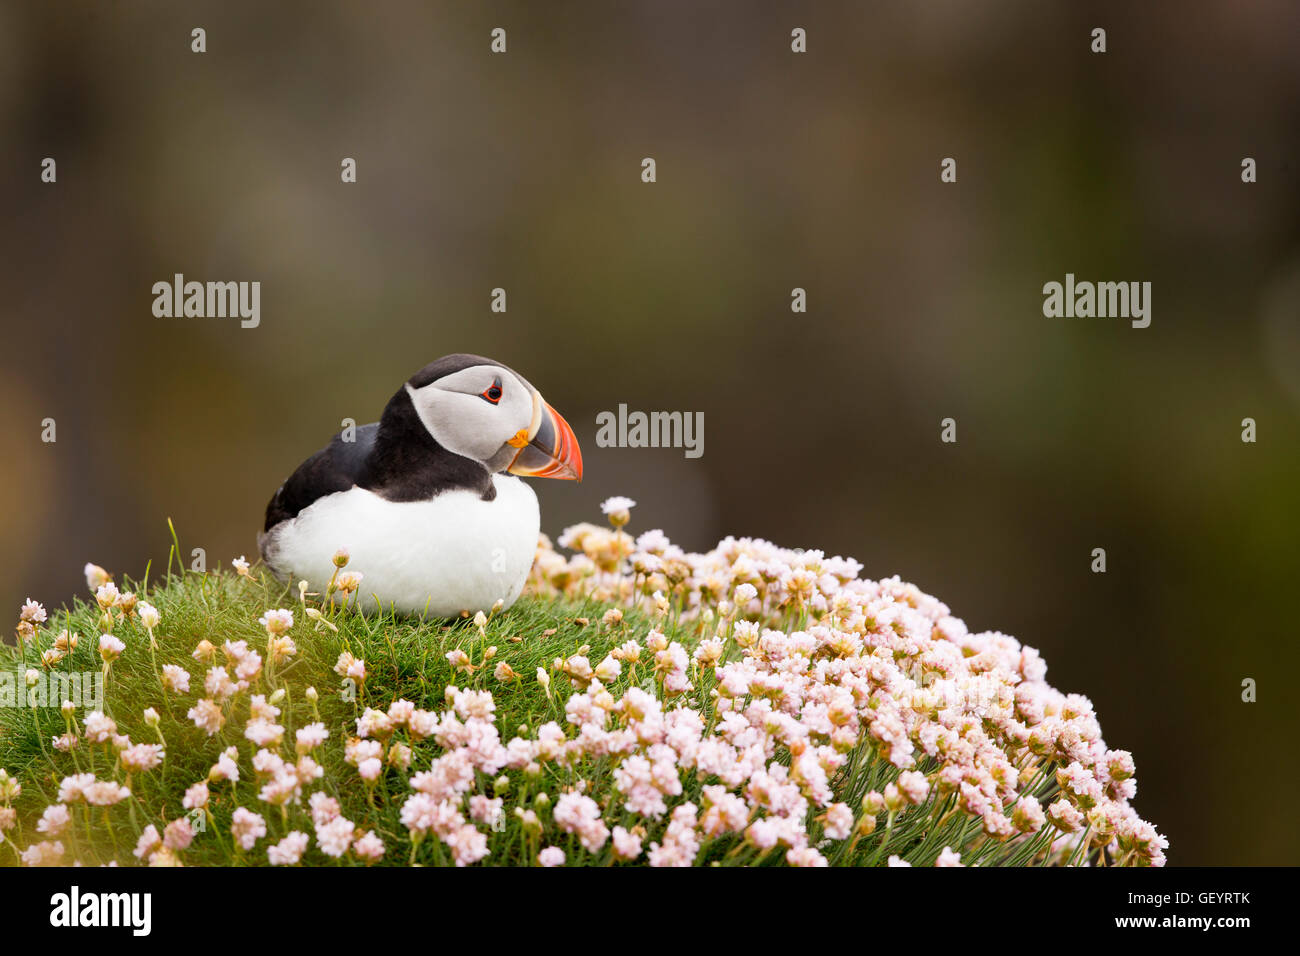 Puffin on Thrift bank Stock Photo